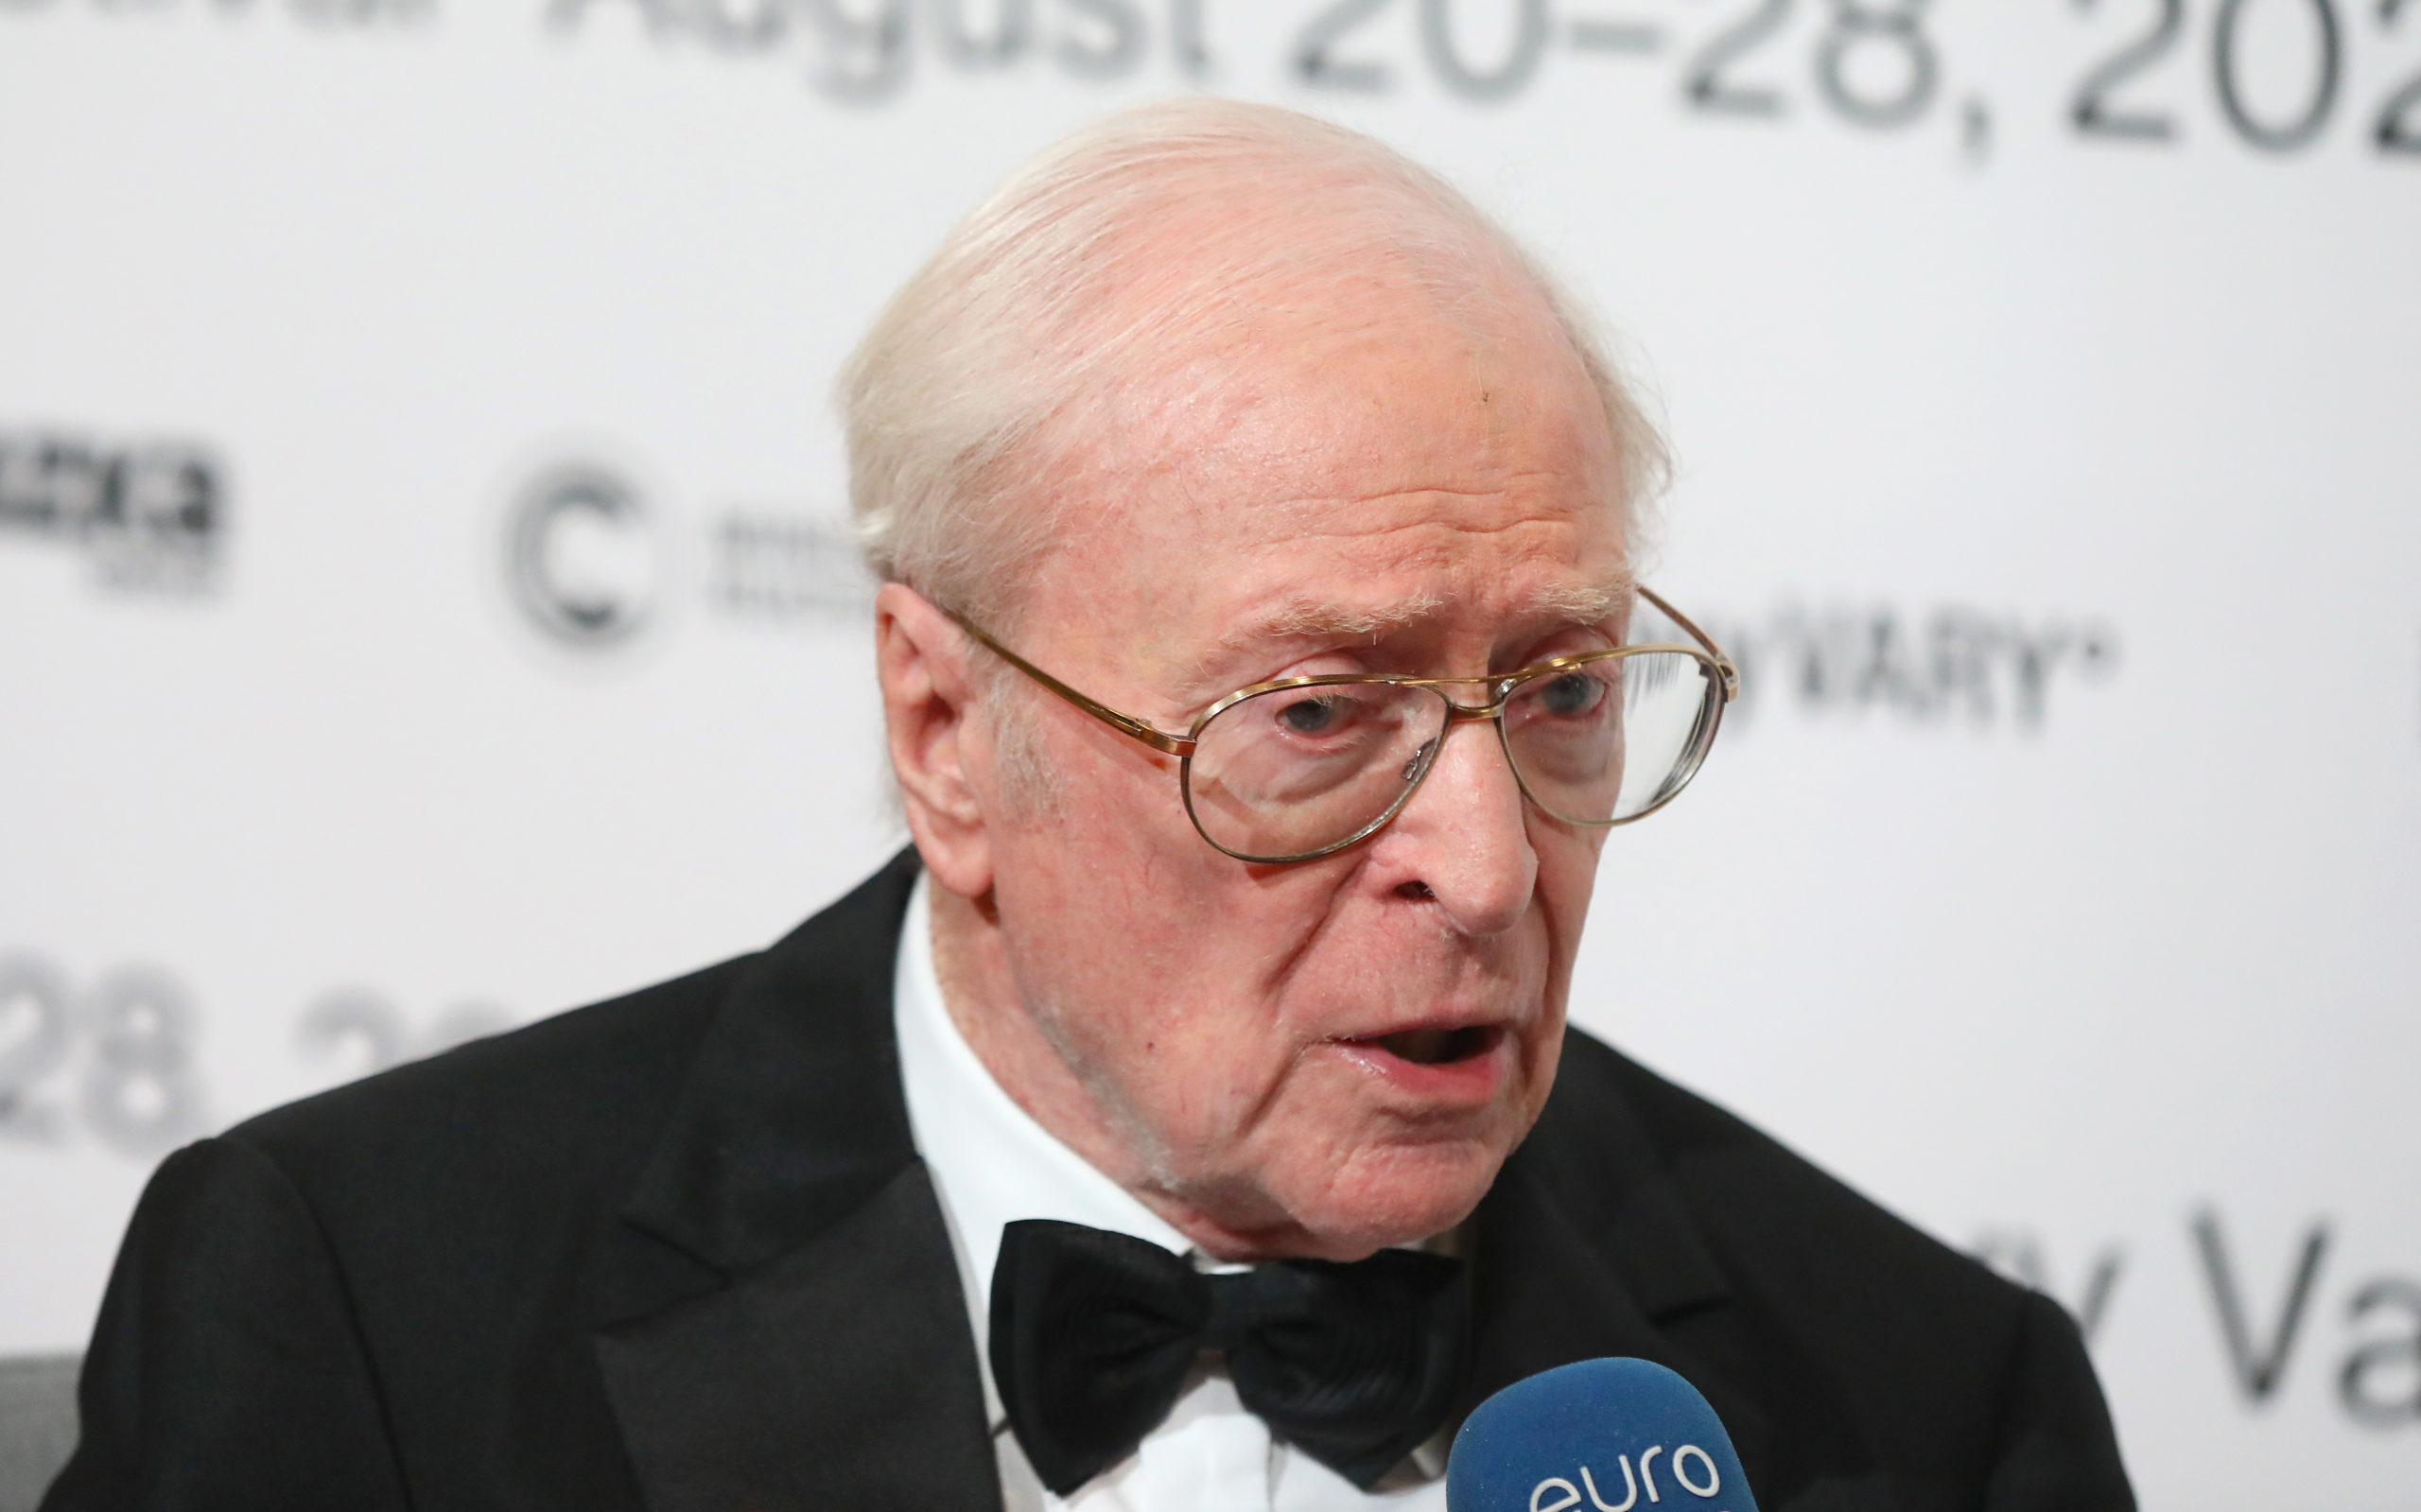 Michael Caine was appalled to learn the U.K. government put his 1964 film "Zulu" on a list of dangerous works -- along with those of Shakespeare and Tolkein -- that it said may "encourage" extremism.